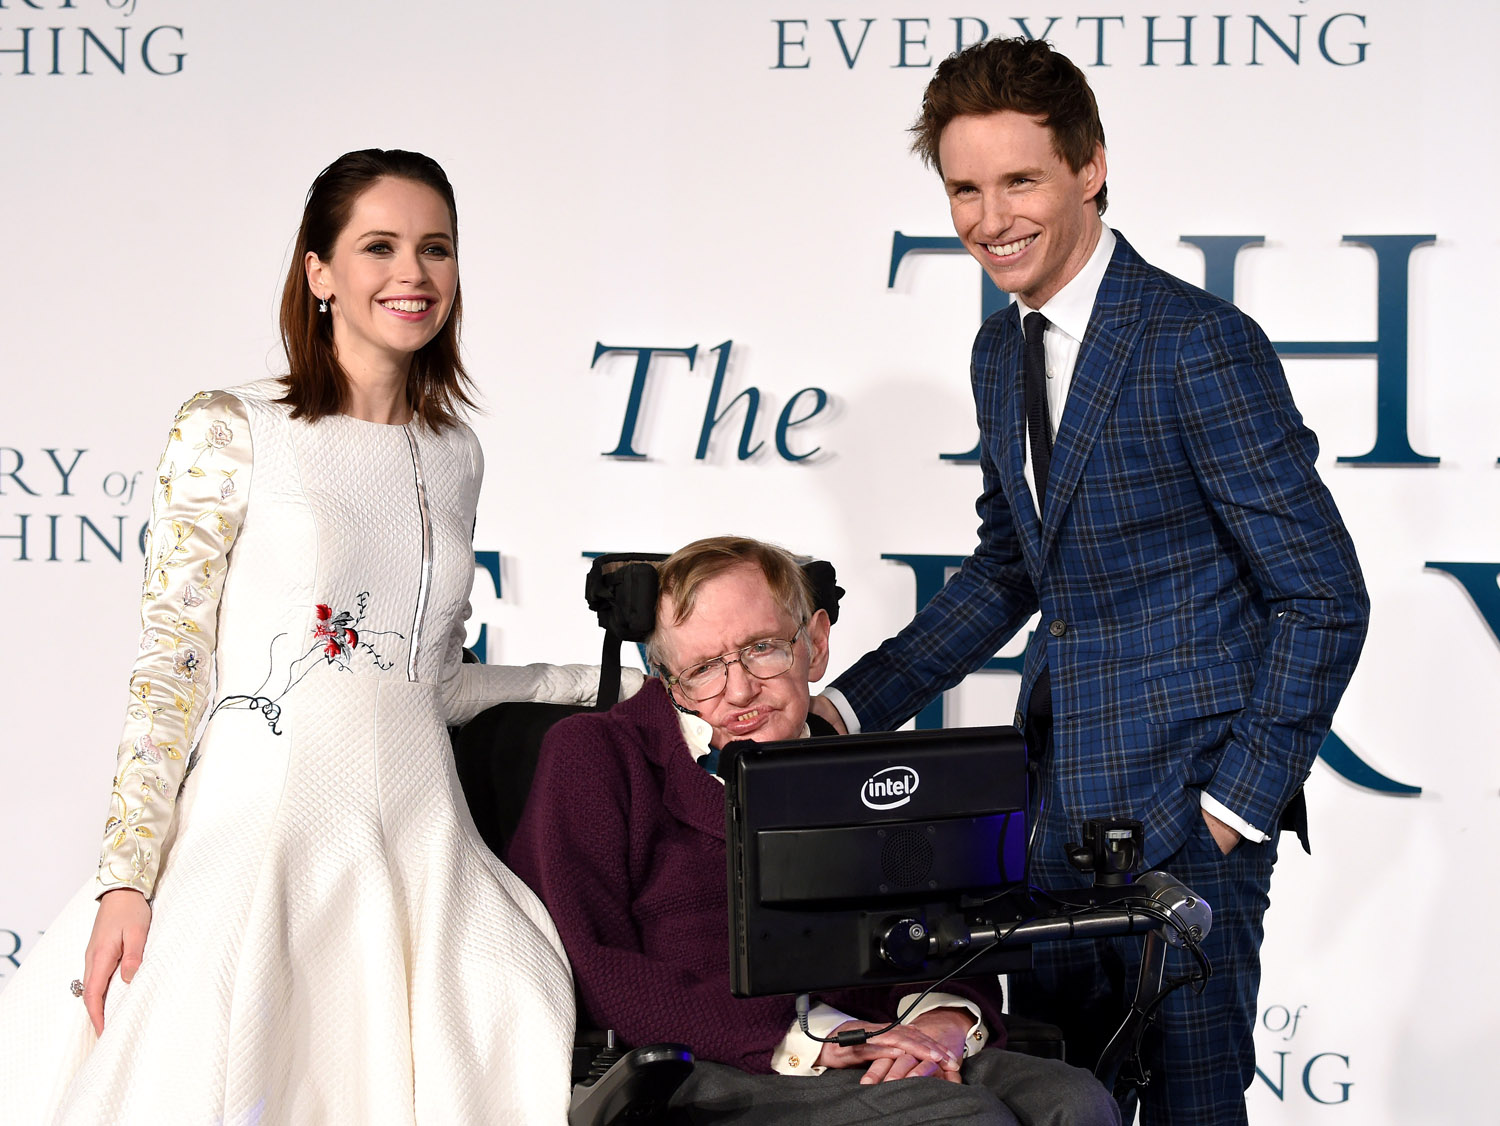 "The Theory Of Everything" - UK Premiere - Red Carpet Arrivals